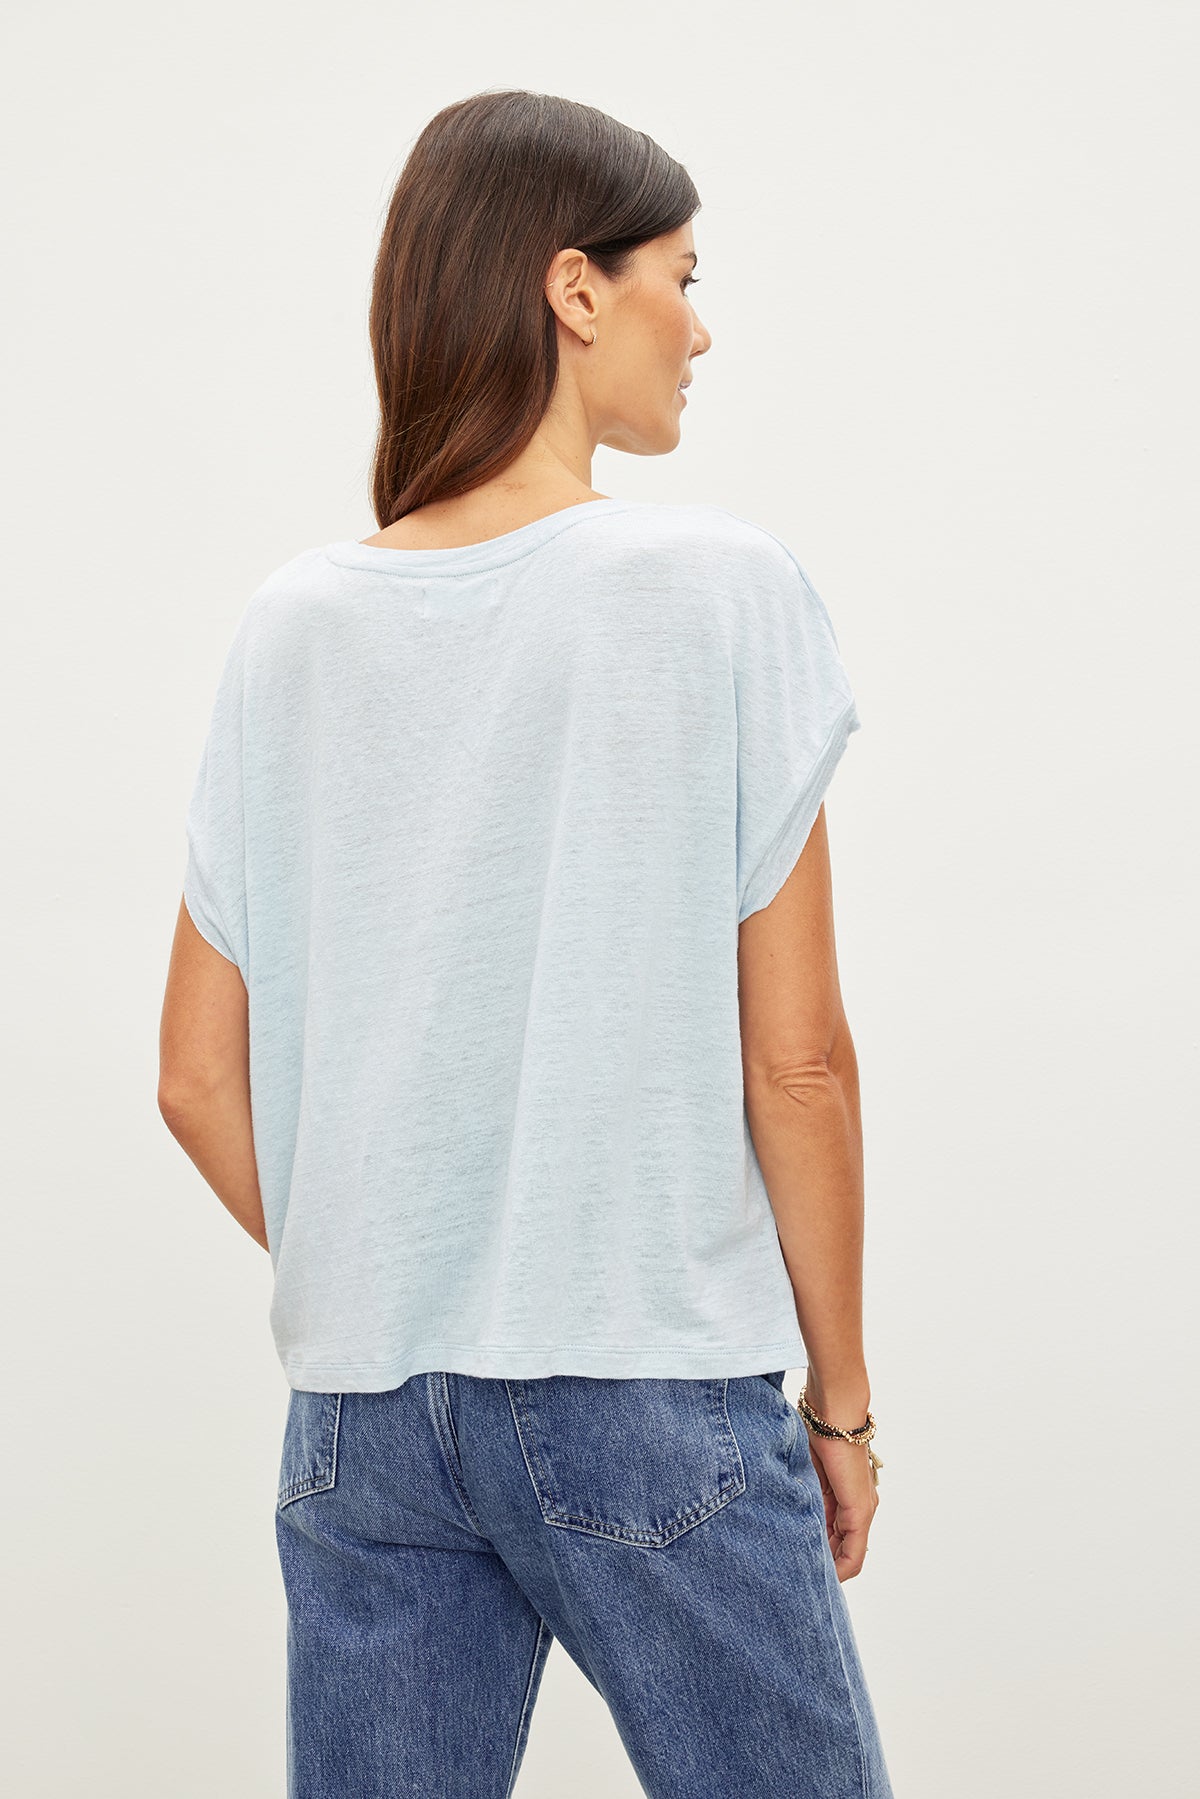   The back view of a woman wearing jeans and a HUDSON CREW NECK TEE by Velvet by Graham & Spencer. 